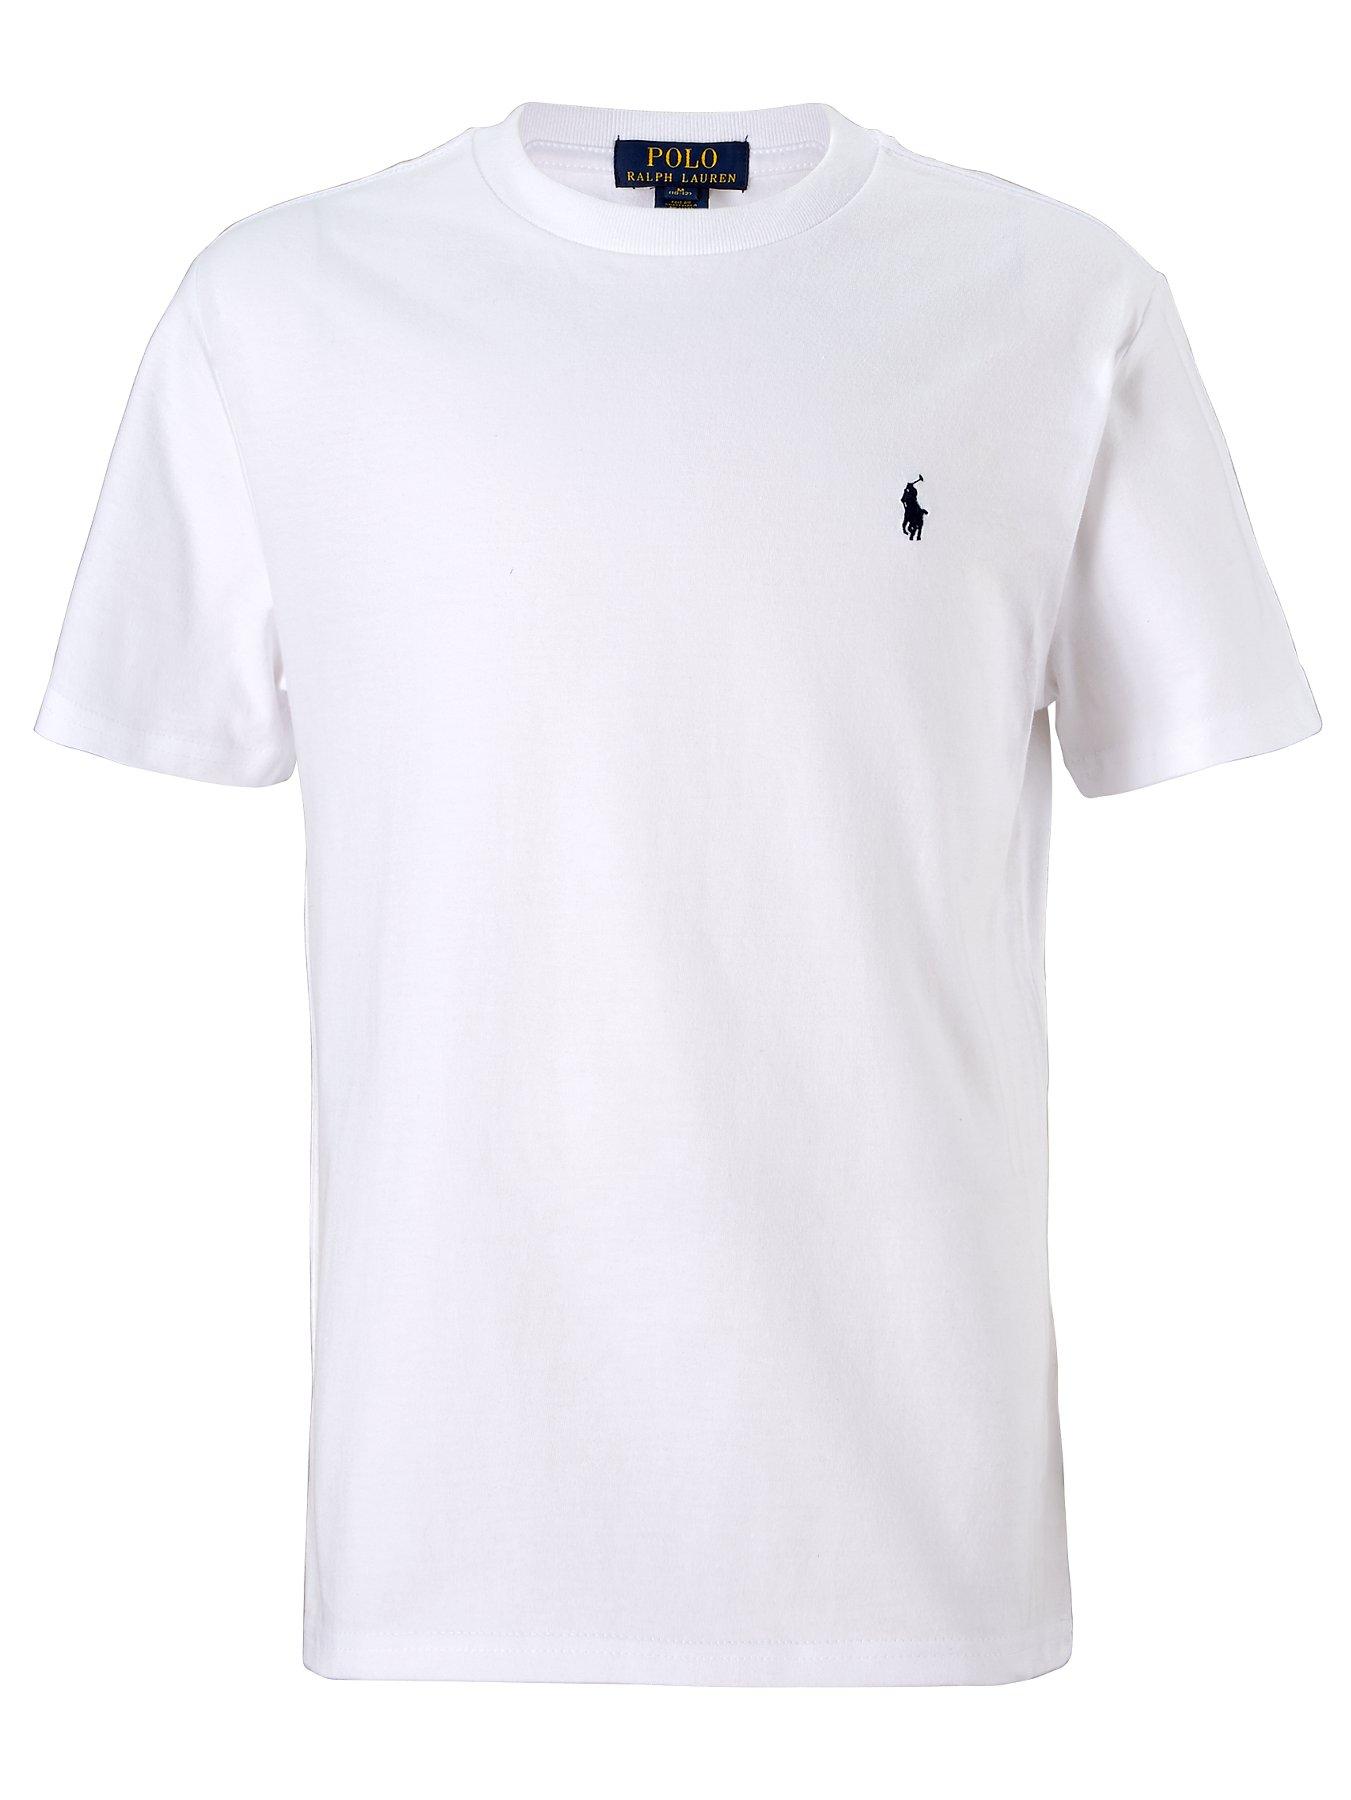 When I ordered a Ralph Lauren V-neck t-shirt I'd thought I'd be getting top grade clothing.It's nice but the material it's made with can be seen through.If I give it a little stretch it's transparent.Otherwise it's ok.But it's so thin I wouldn't sell them under Ralph Lauren's brand name/5().